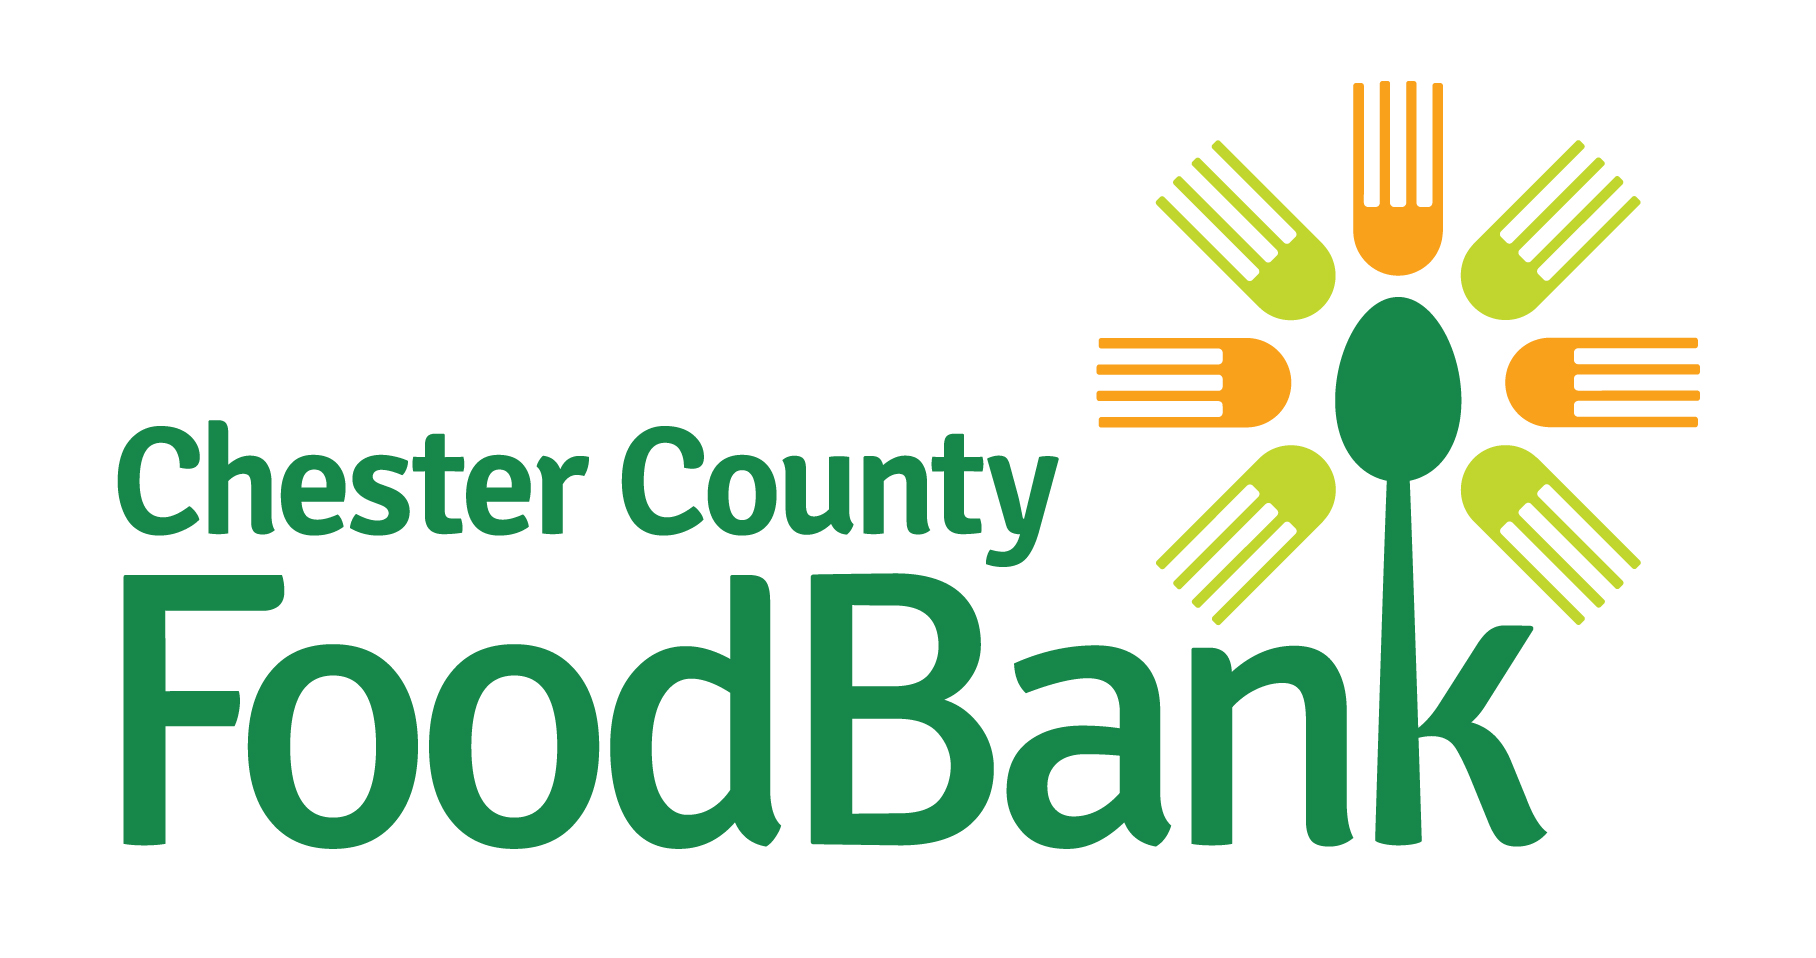 Chester County Food Bank logo